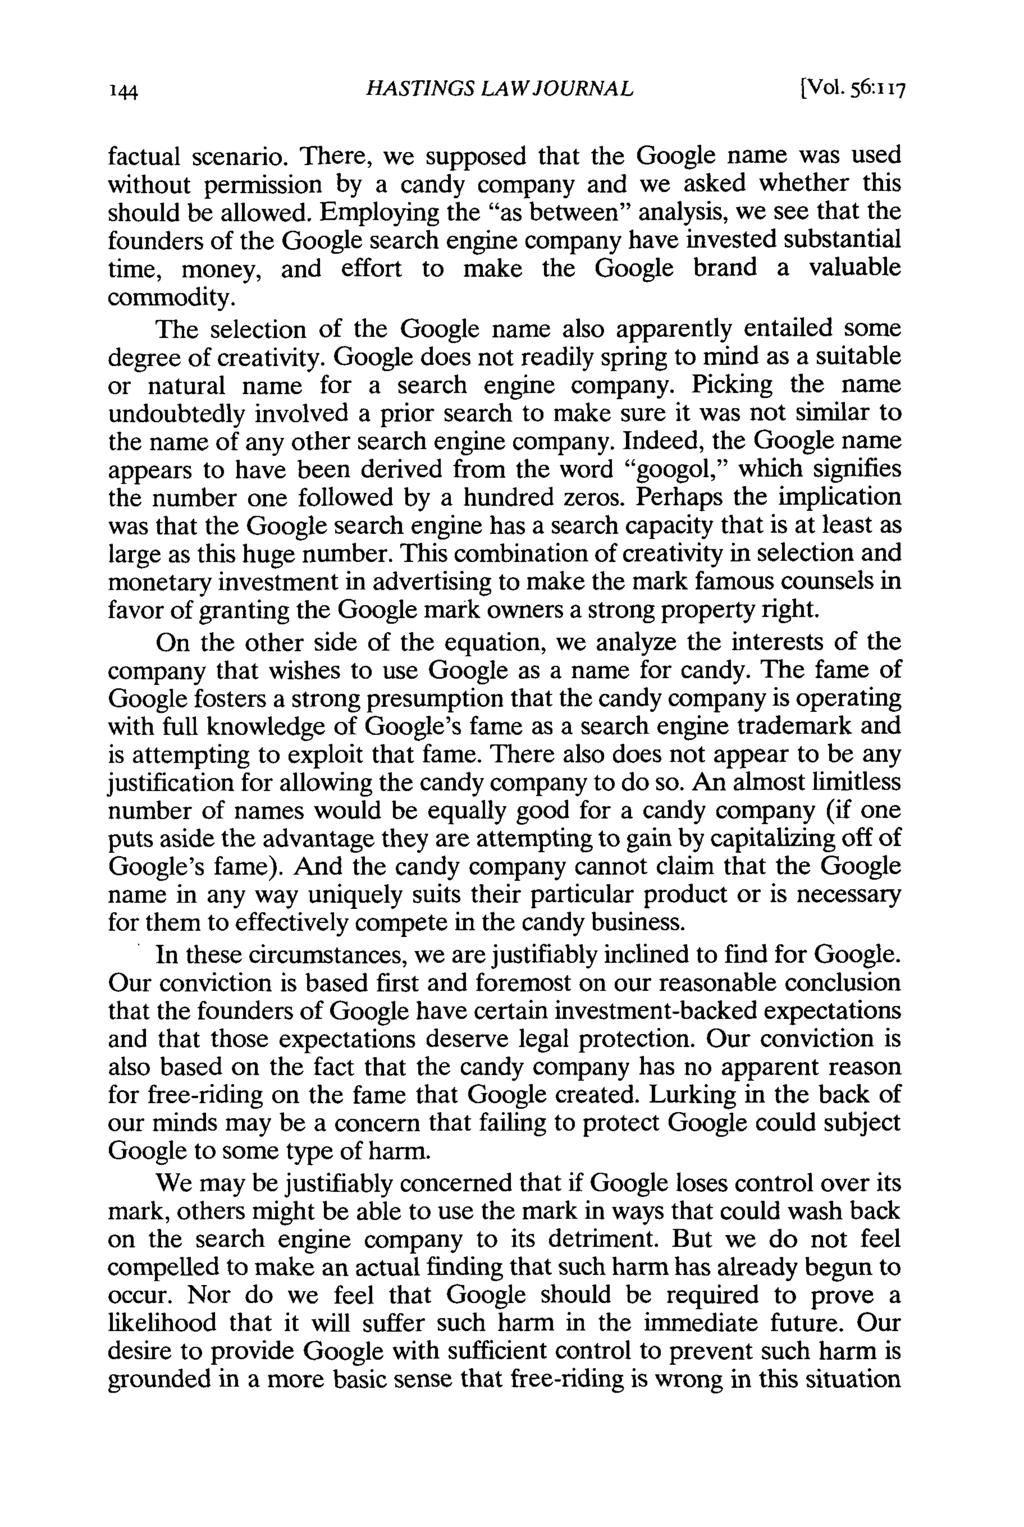 HASTINGS LAW JOURNAL [VOL. 56:11I7 factual scenario. There, we supposed that the Google name was used without permission by a candy company and we asked whether this should be allowed.